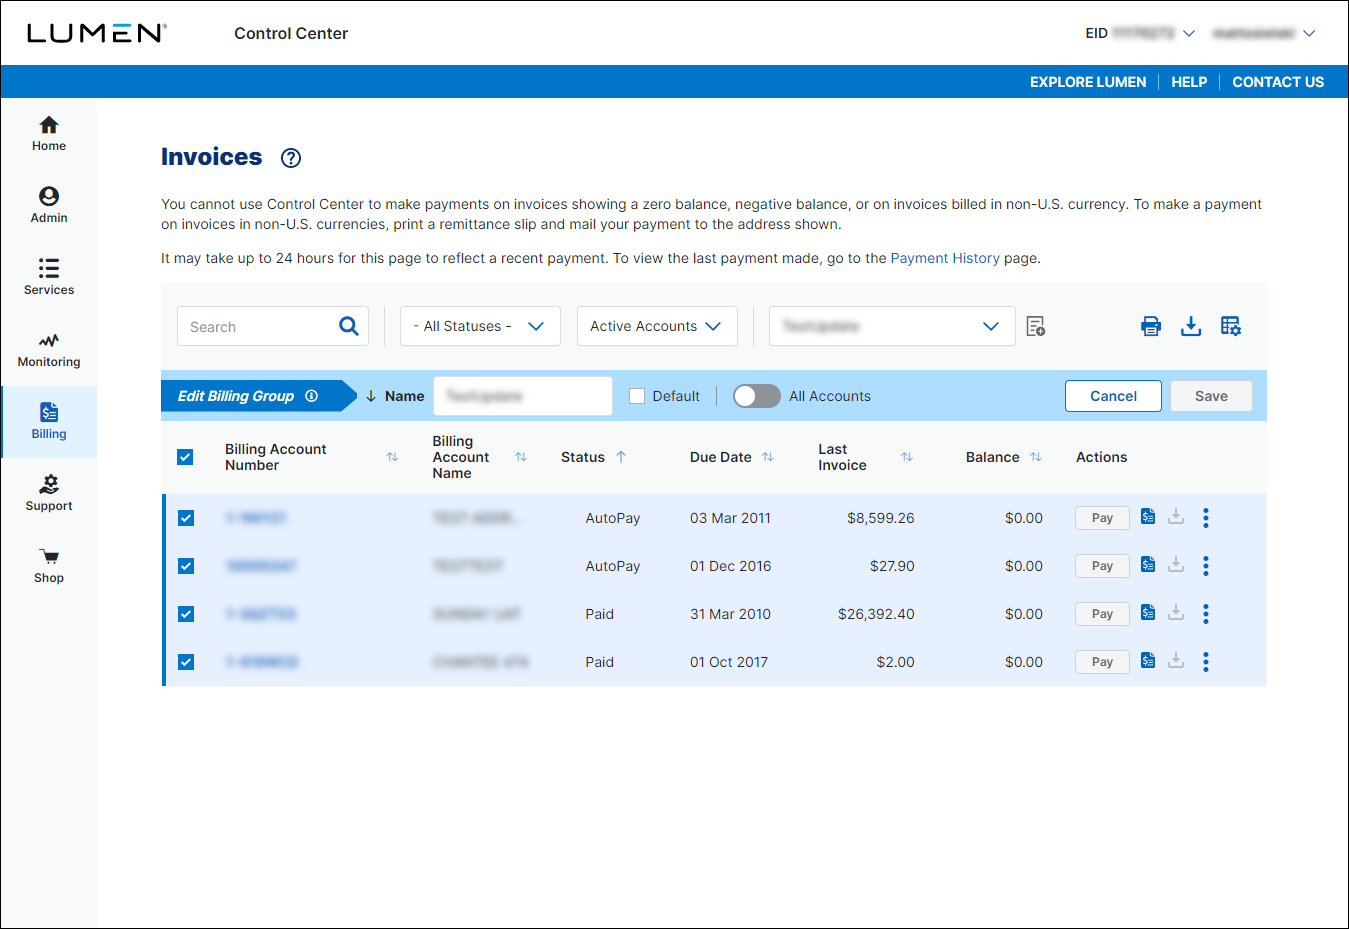 Invoices (showing billing group settings)